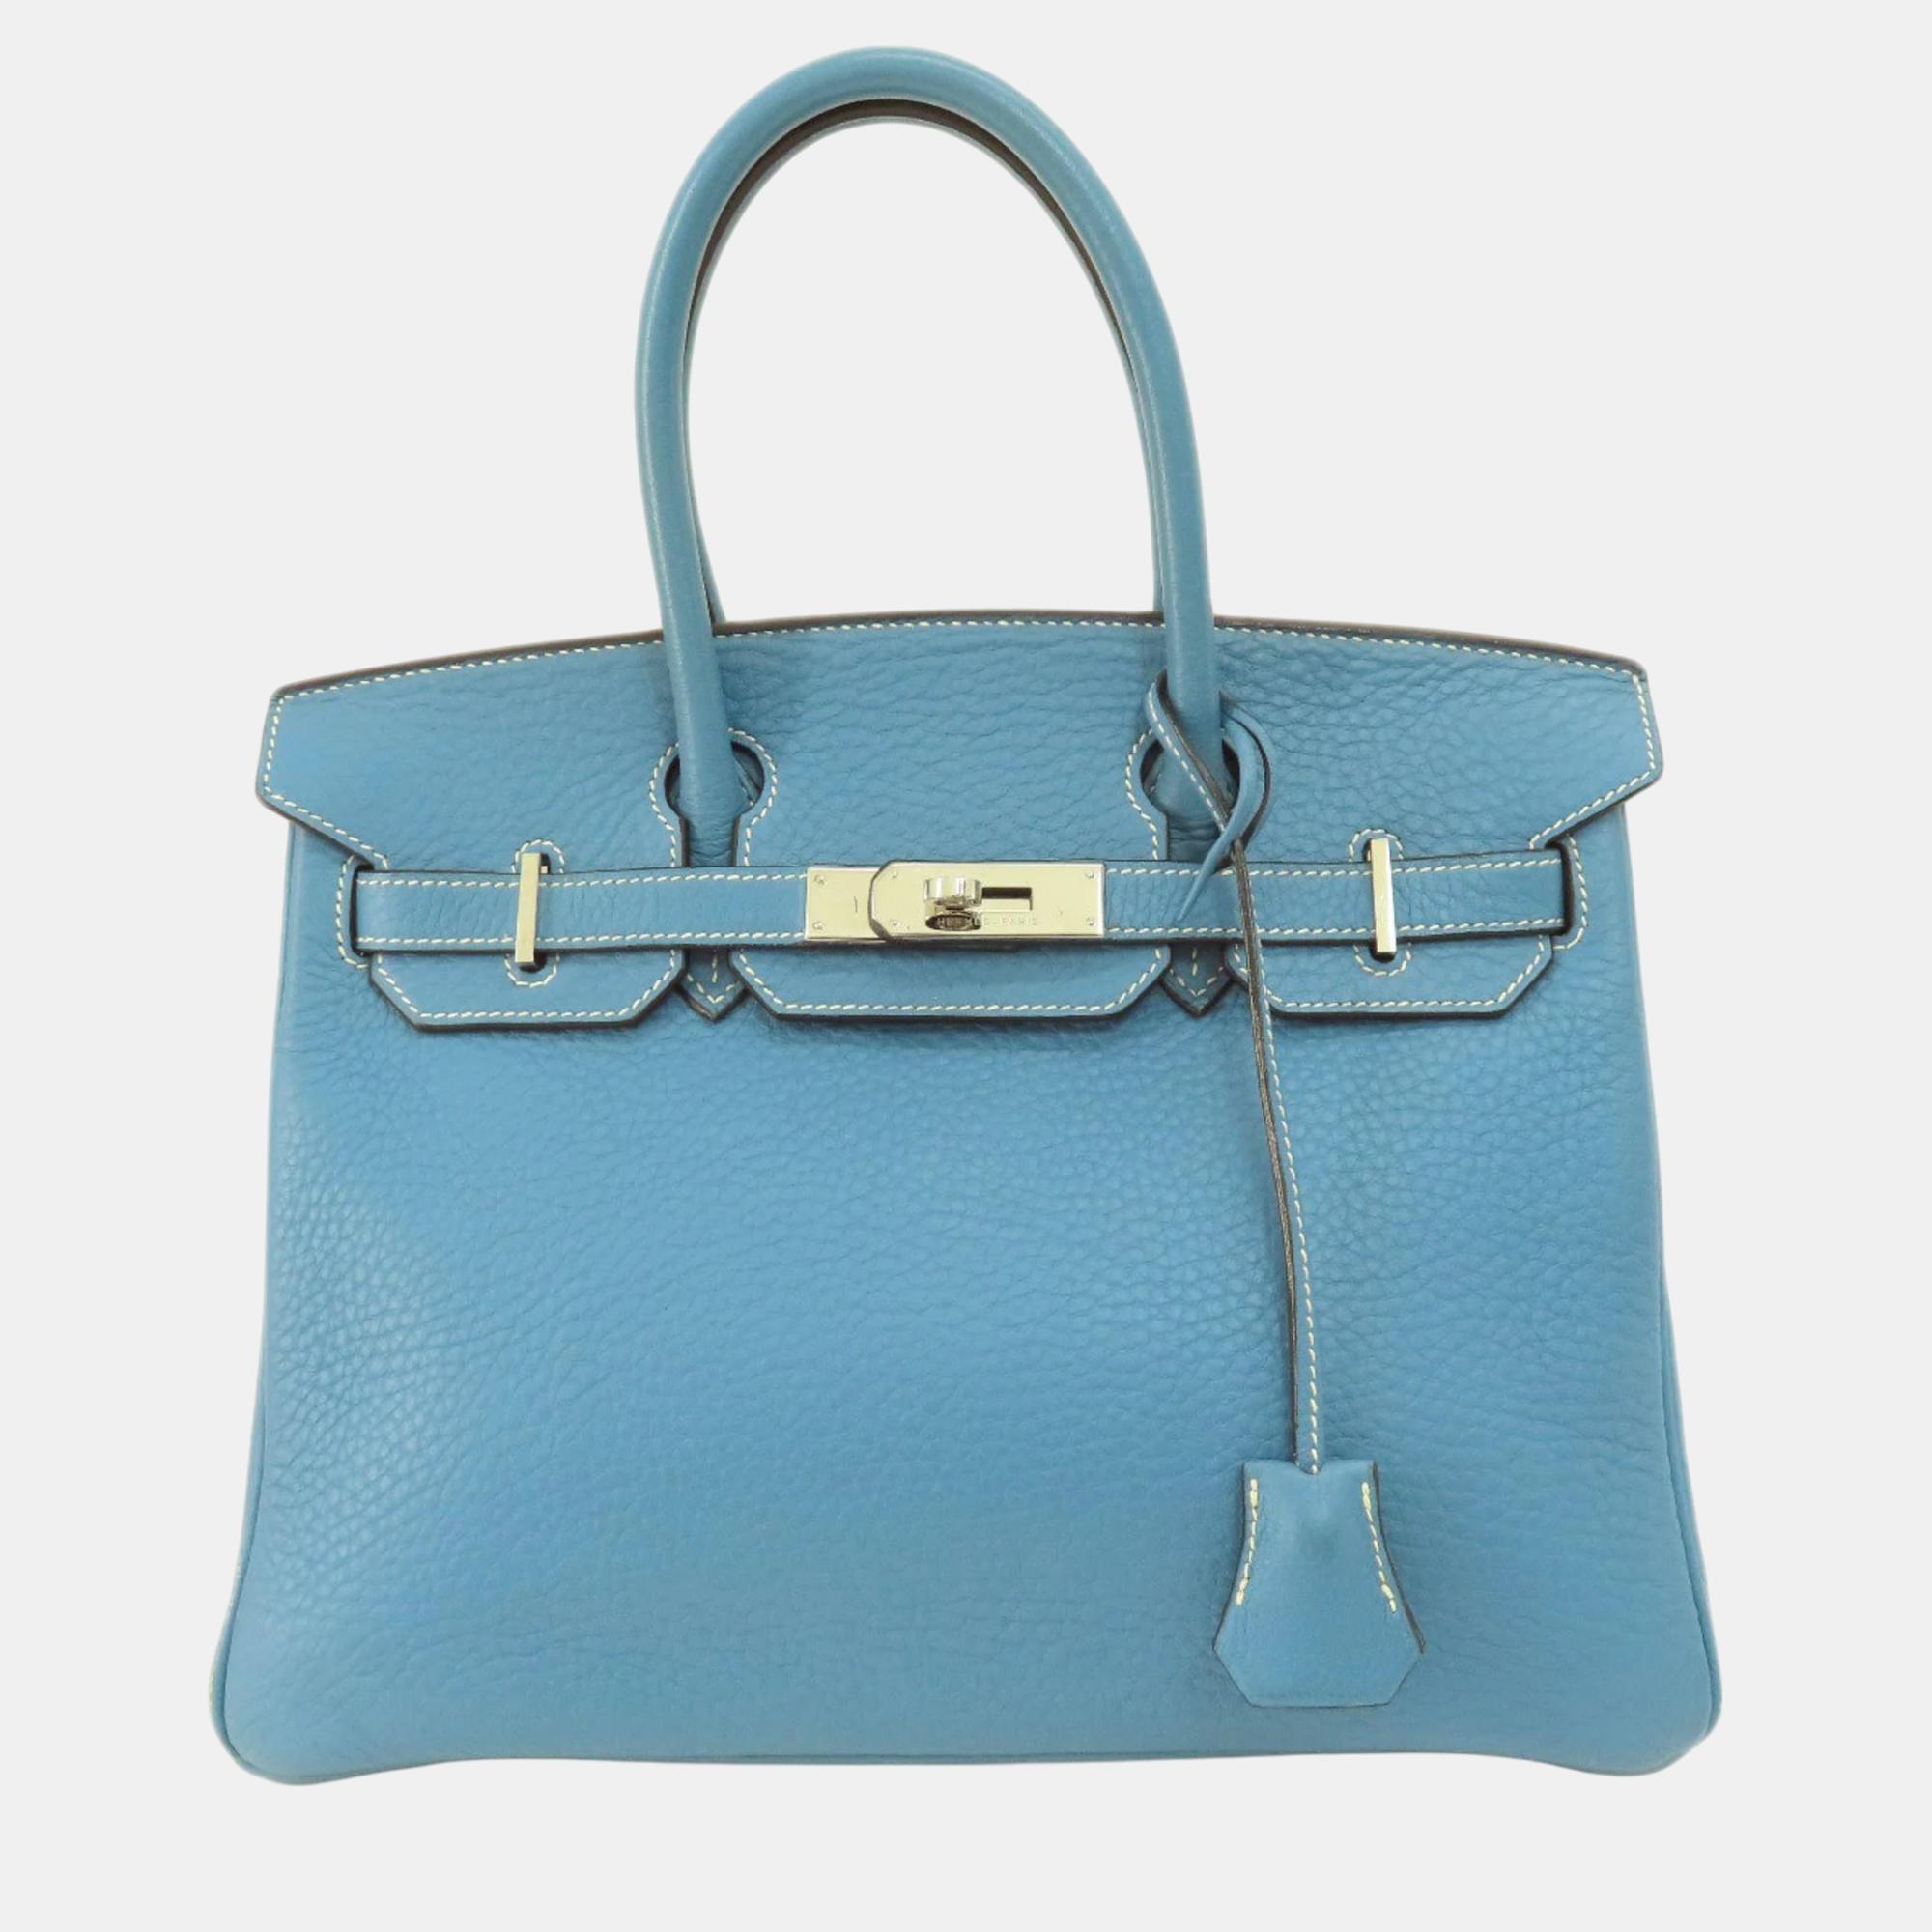 Hermes blue jean taurillon clemence leather birkin 30 tote bag